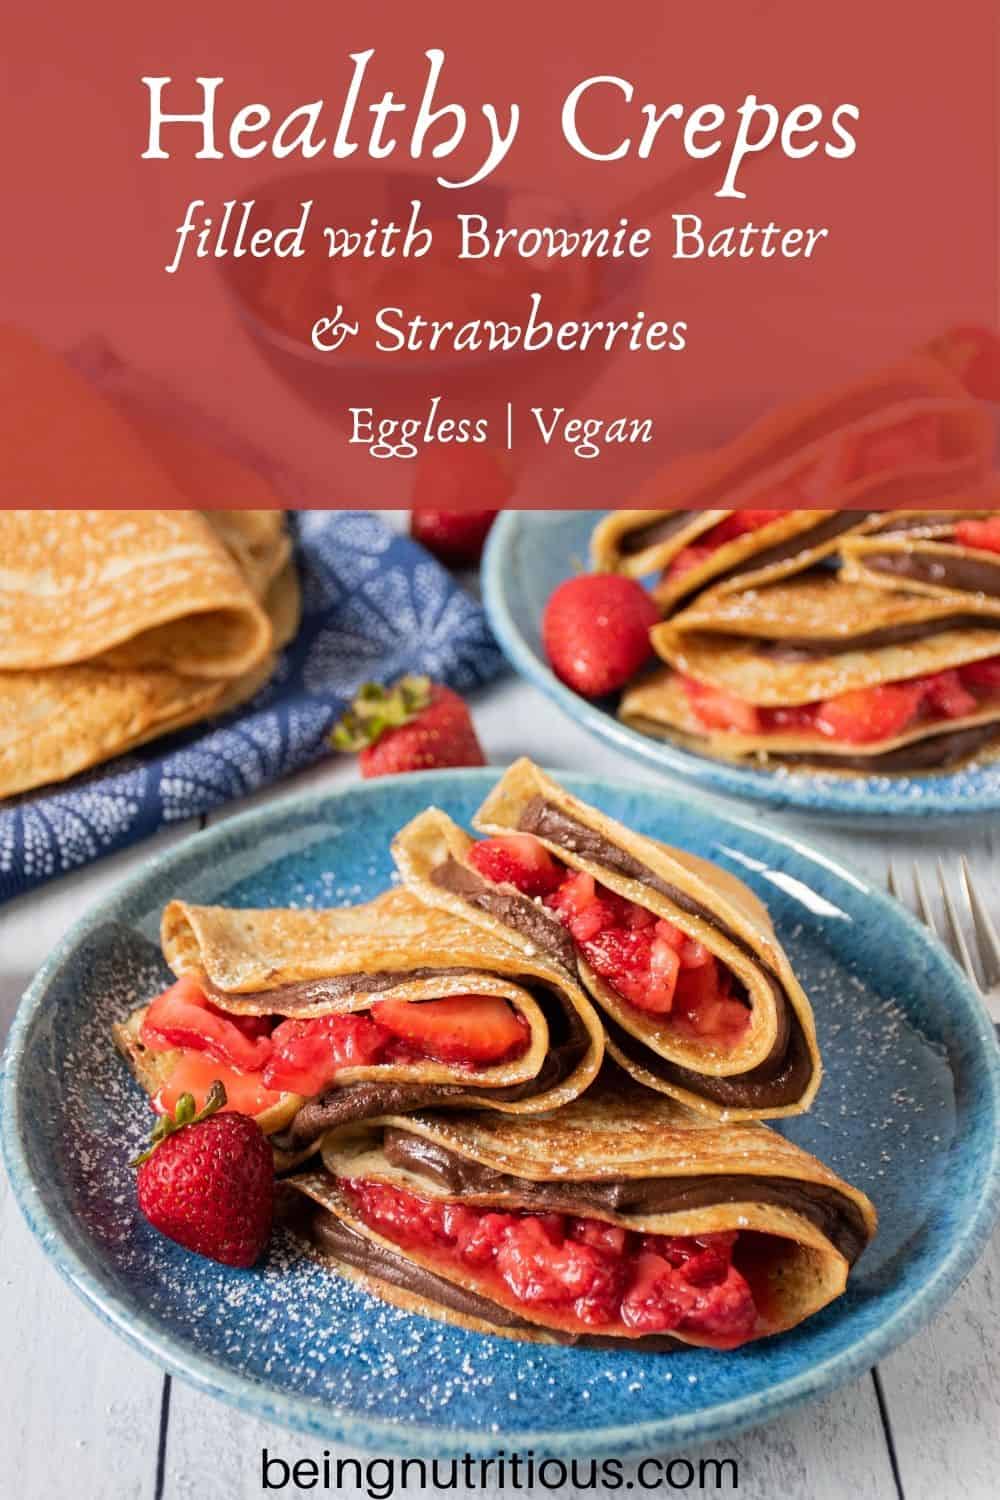 Plate of 3 crepes stuffed with chocolate dip and strawberries. Text overlay: Healthy Crepes filled with Brownie Batter and strawberries; Eggless, Vegan